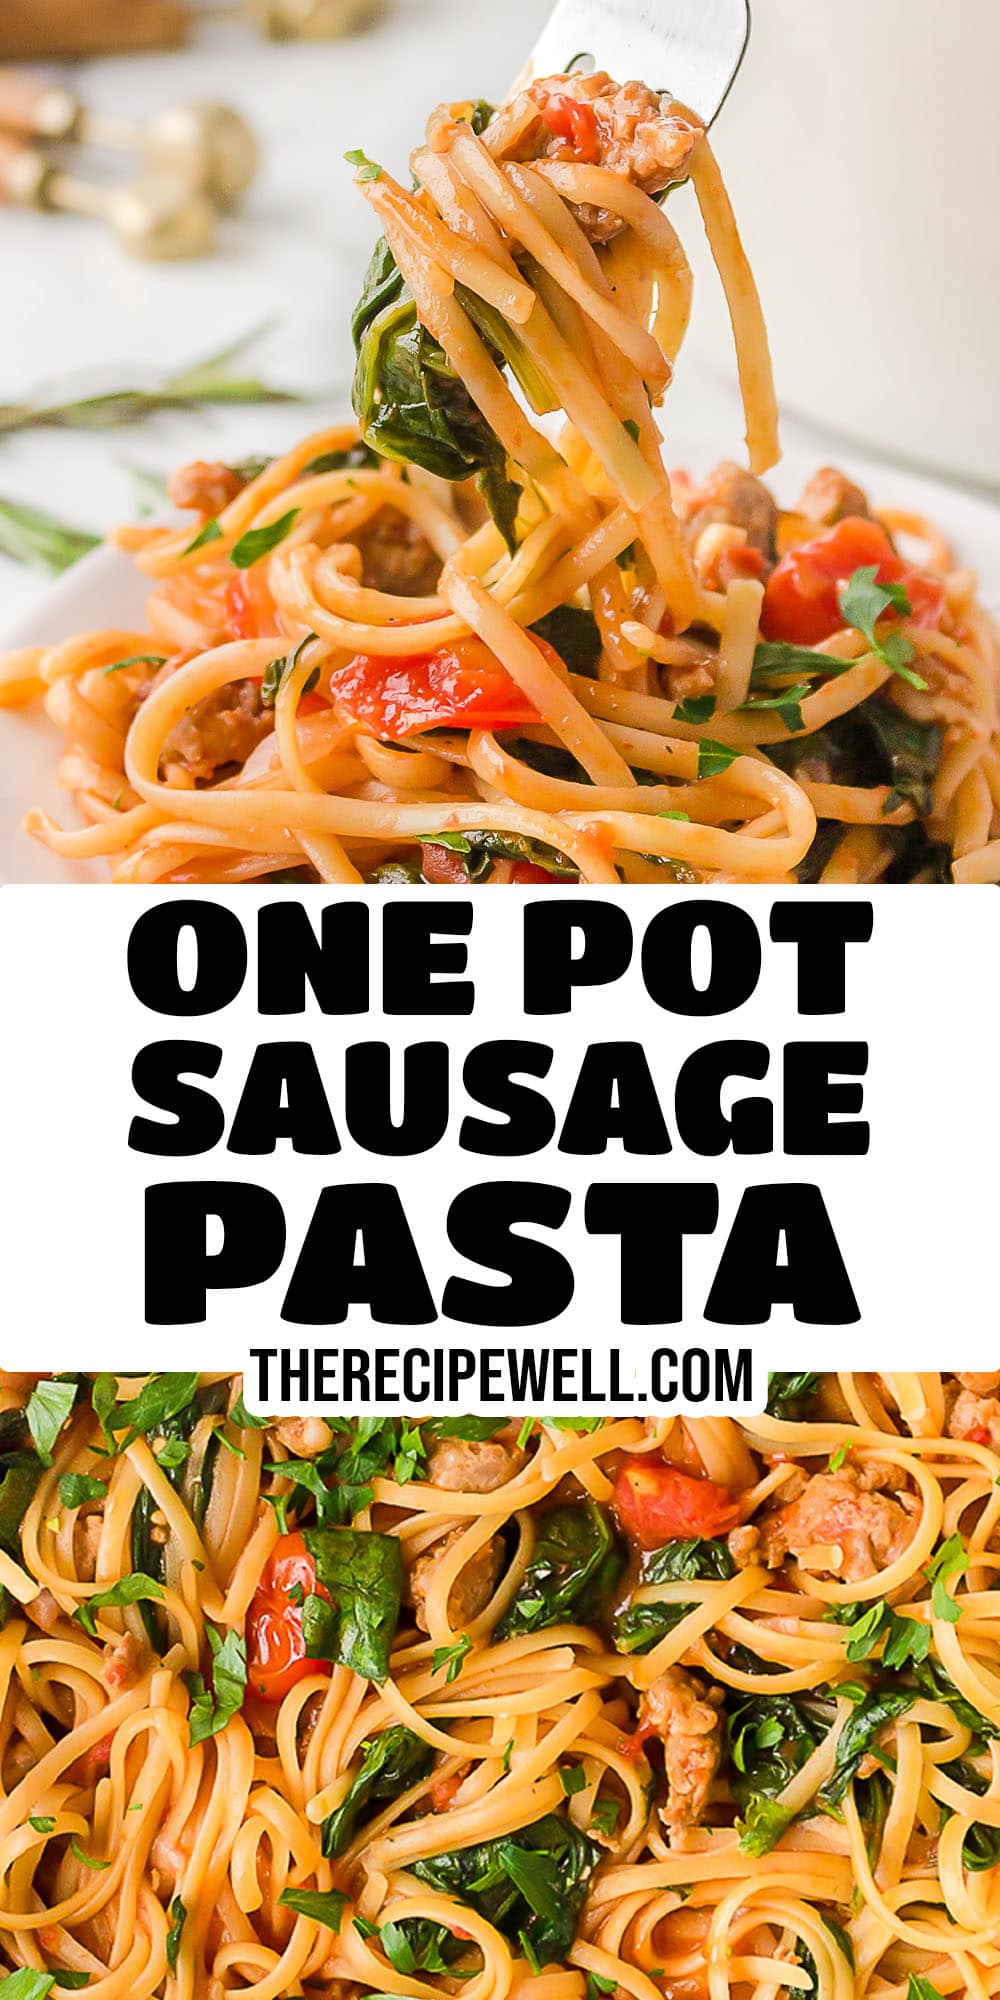 This One-Pot Sausage Pasta is super flavourful and comes together quickly for an easy weeknight dinner. Made with linguine, Italian sausage, fresh tomatoes and spinach, this pasta is a crowdpleaser! via @therecipewell